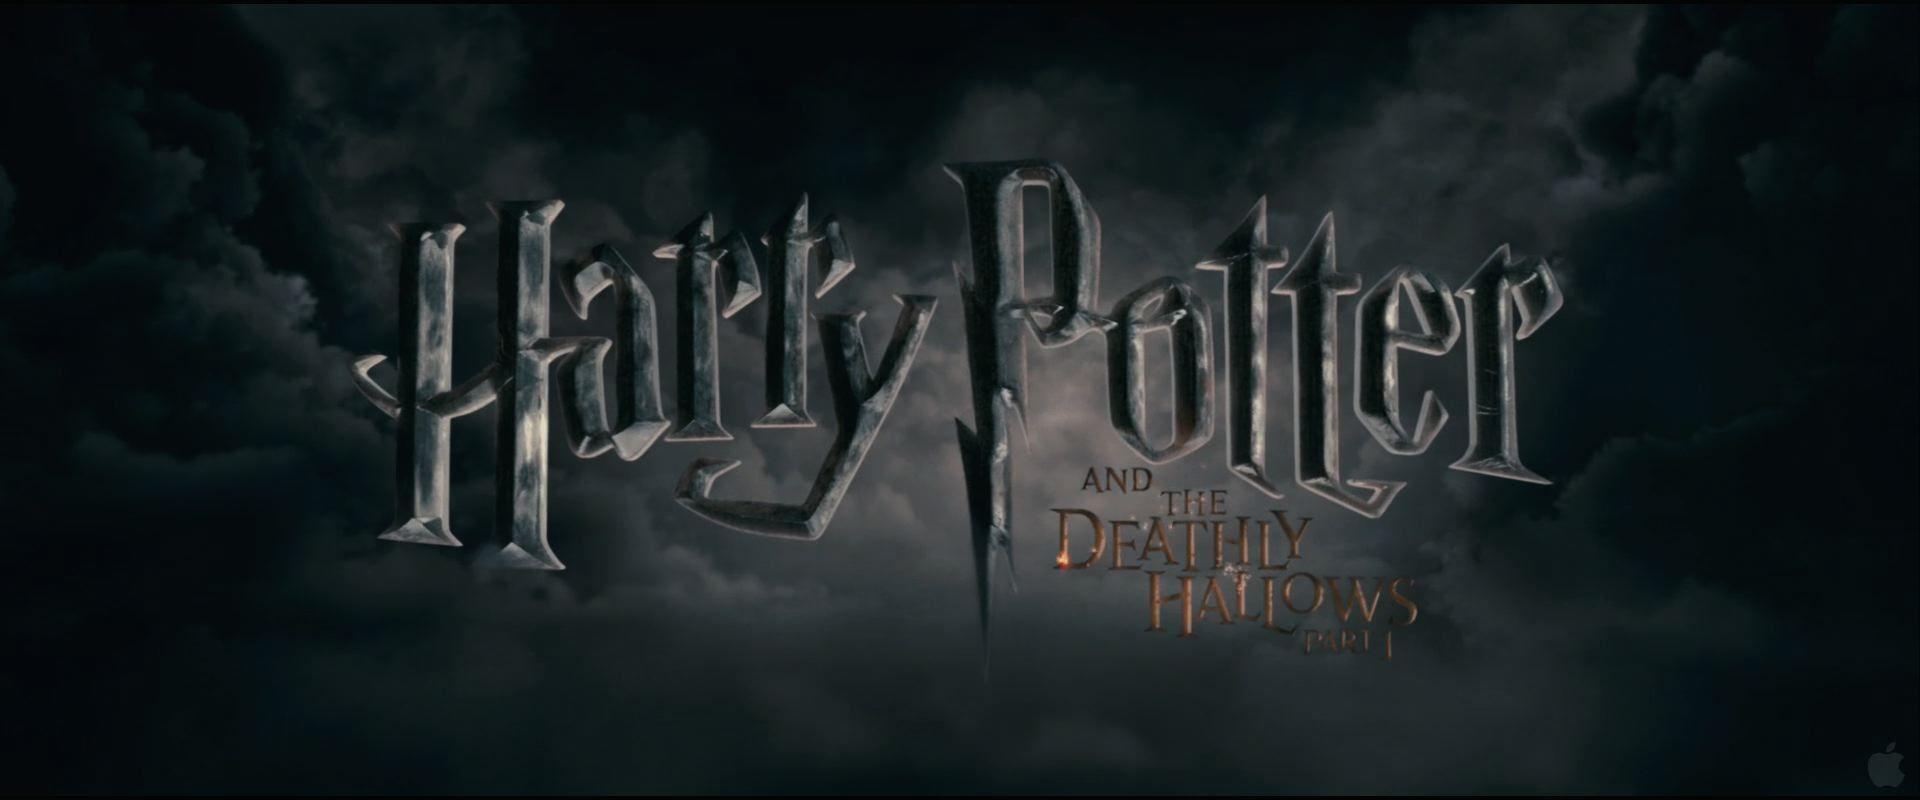 Harry Potter and the Deathly Hallows Movie Logo Desktop Wallpaper